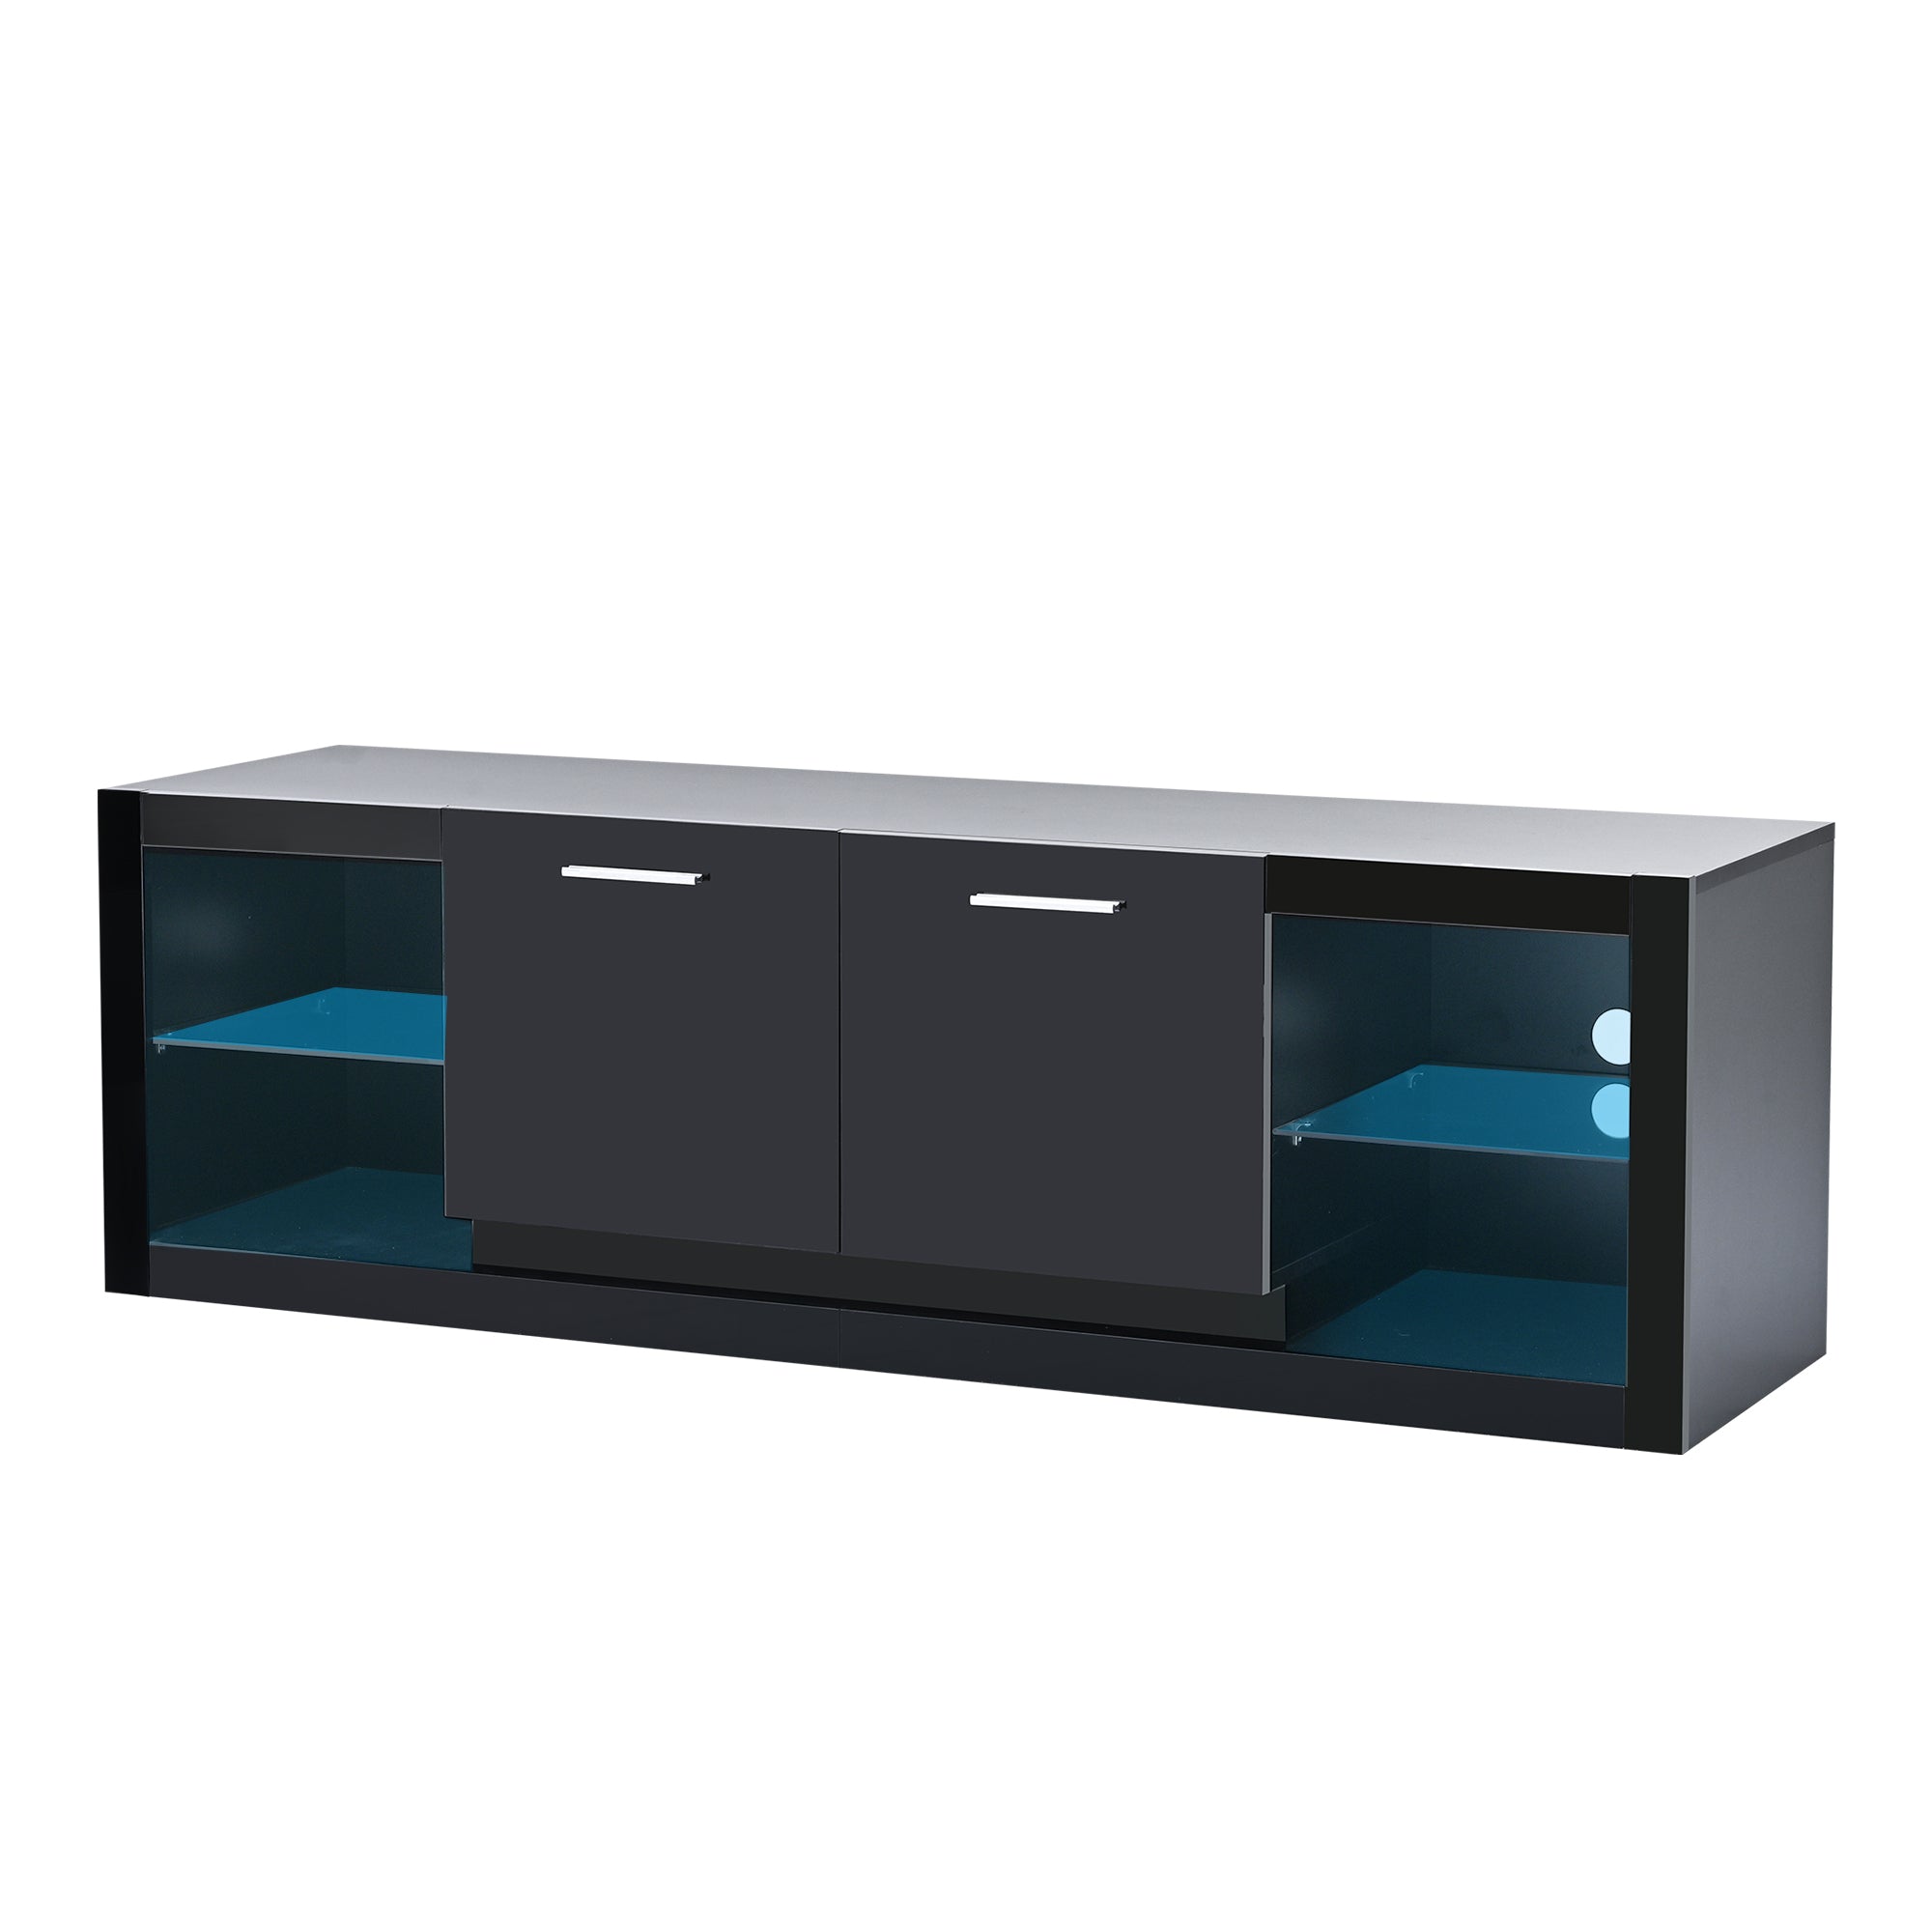 ON TREND Modern TV Stand with 2 Tempered Glass black-particle board